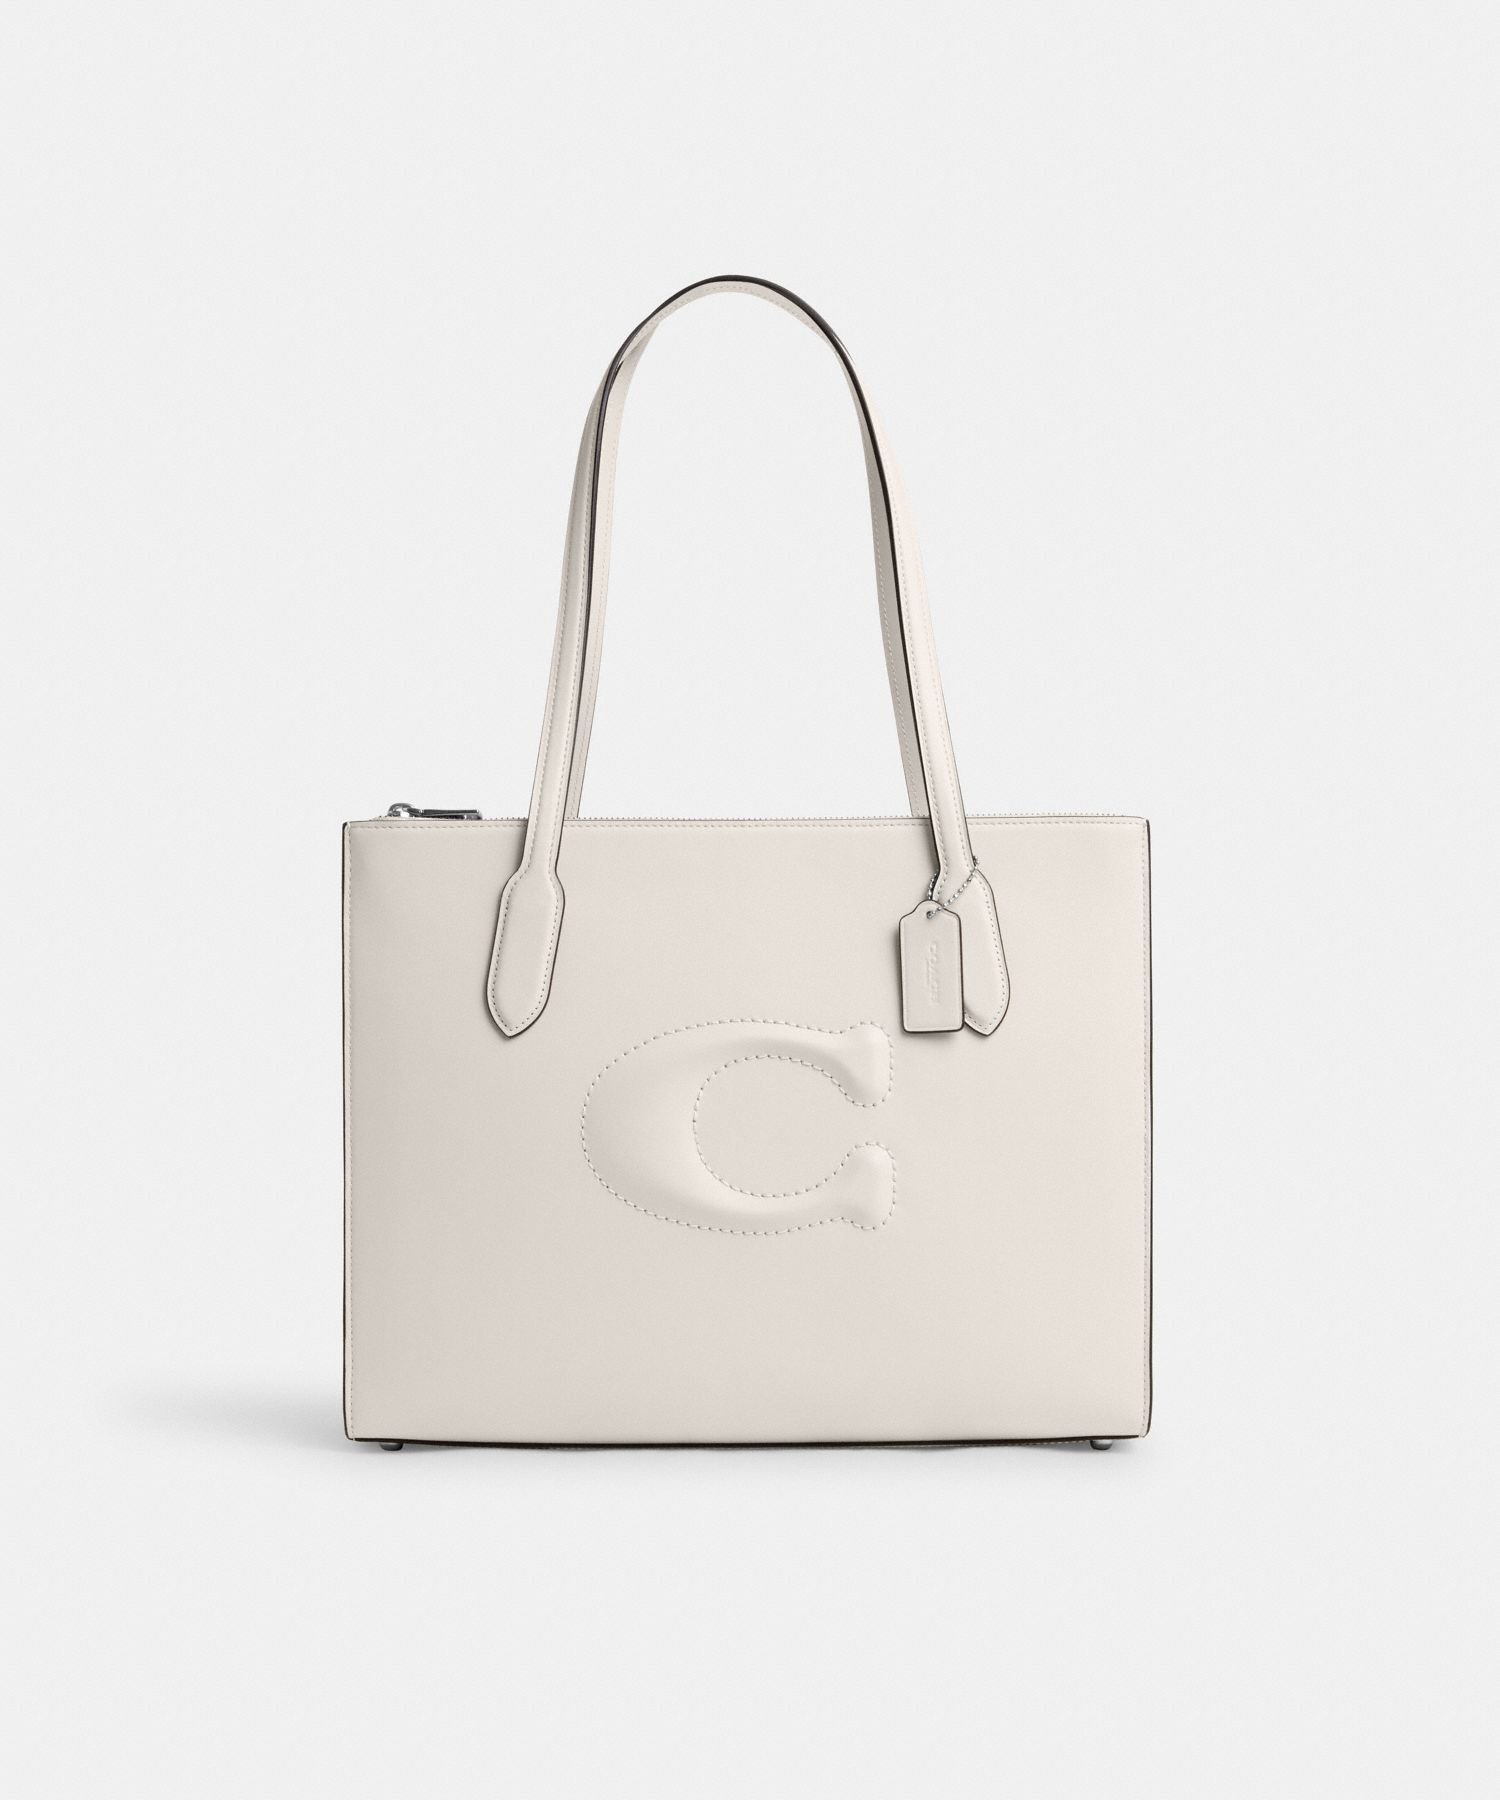 【SALE／62 OFF】COACH OUTLET ニーナ トート コーチ アウトレット バッグ ショルダーバッグ ホワイト【送料無料】